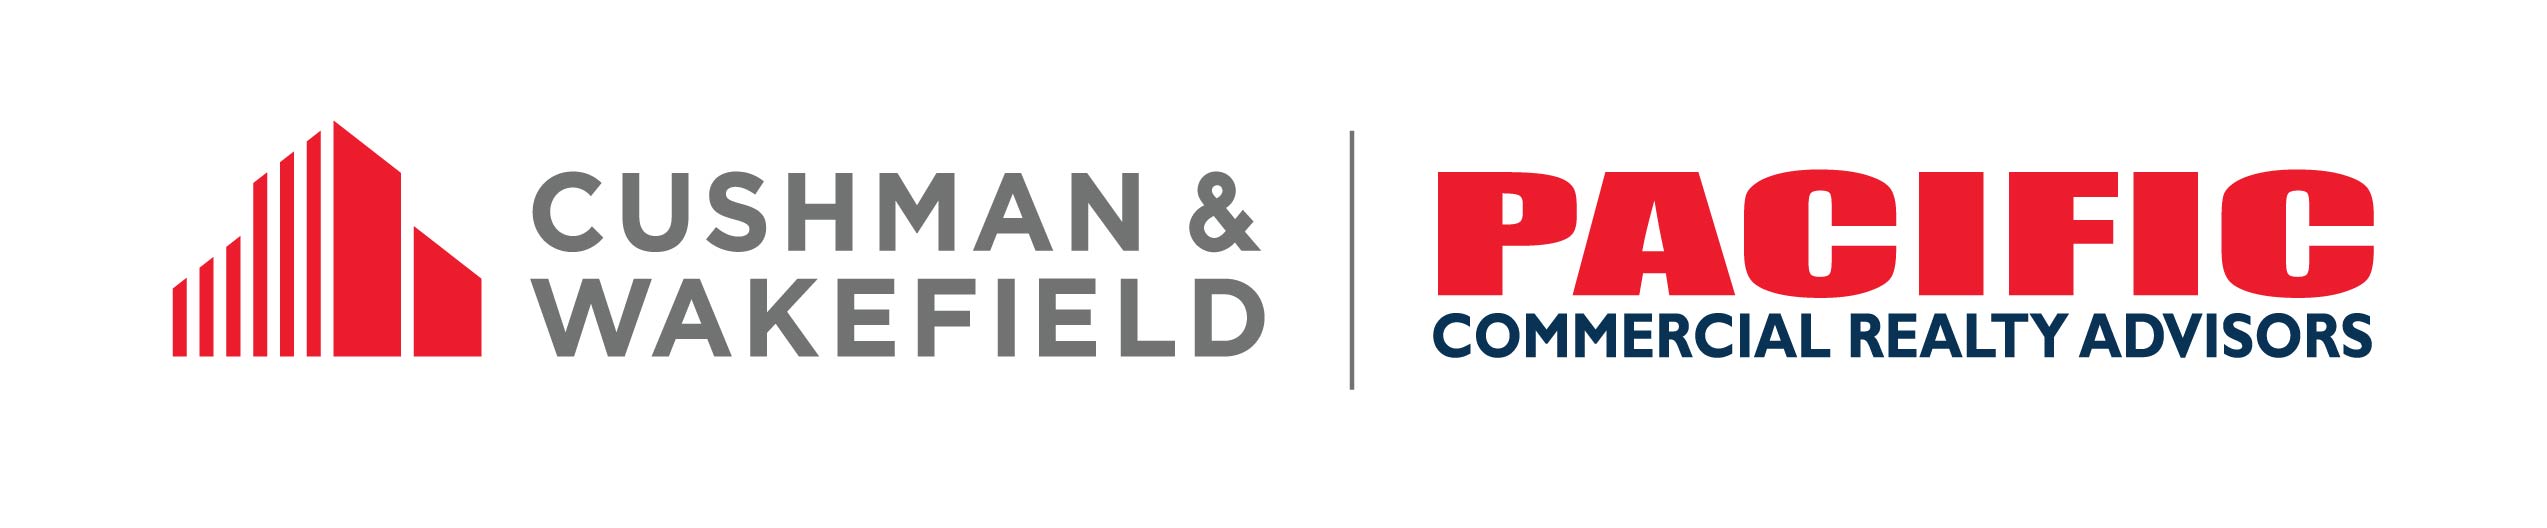 Cushman & Wakefield Pacific Commerce Realty Advisors - Property Management